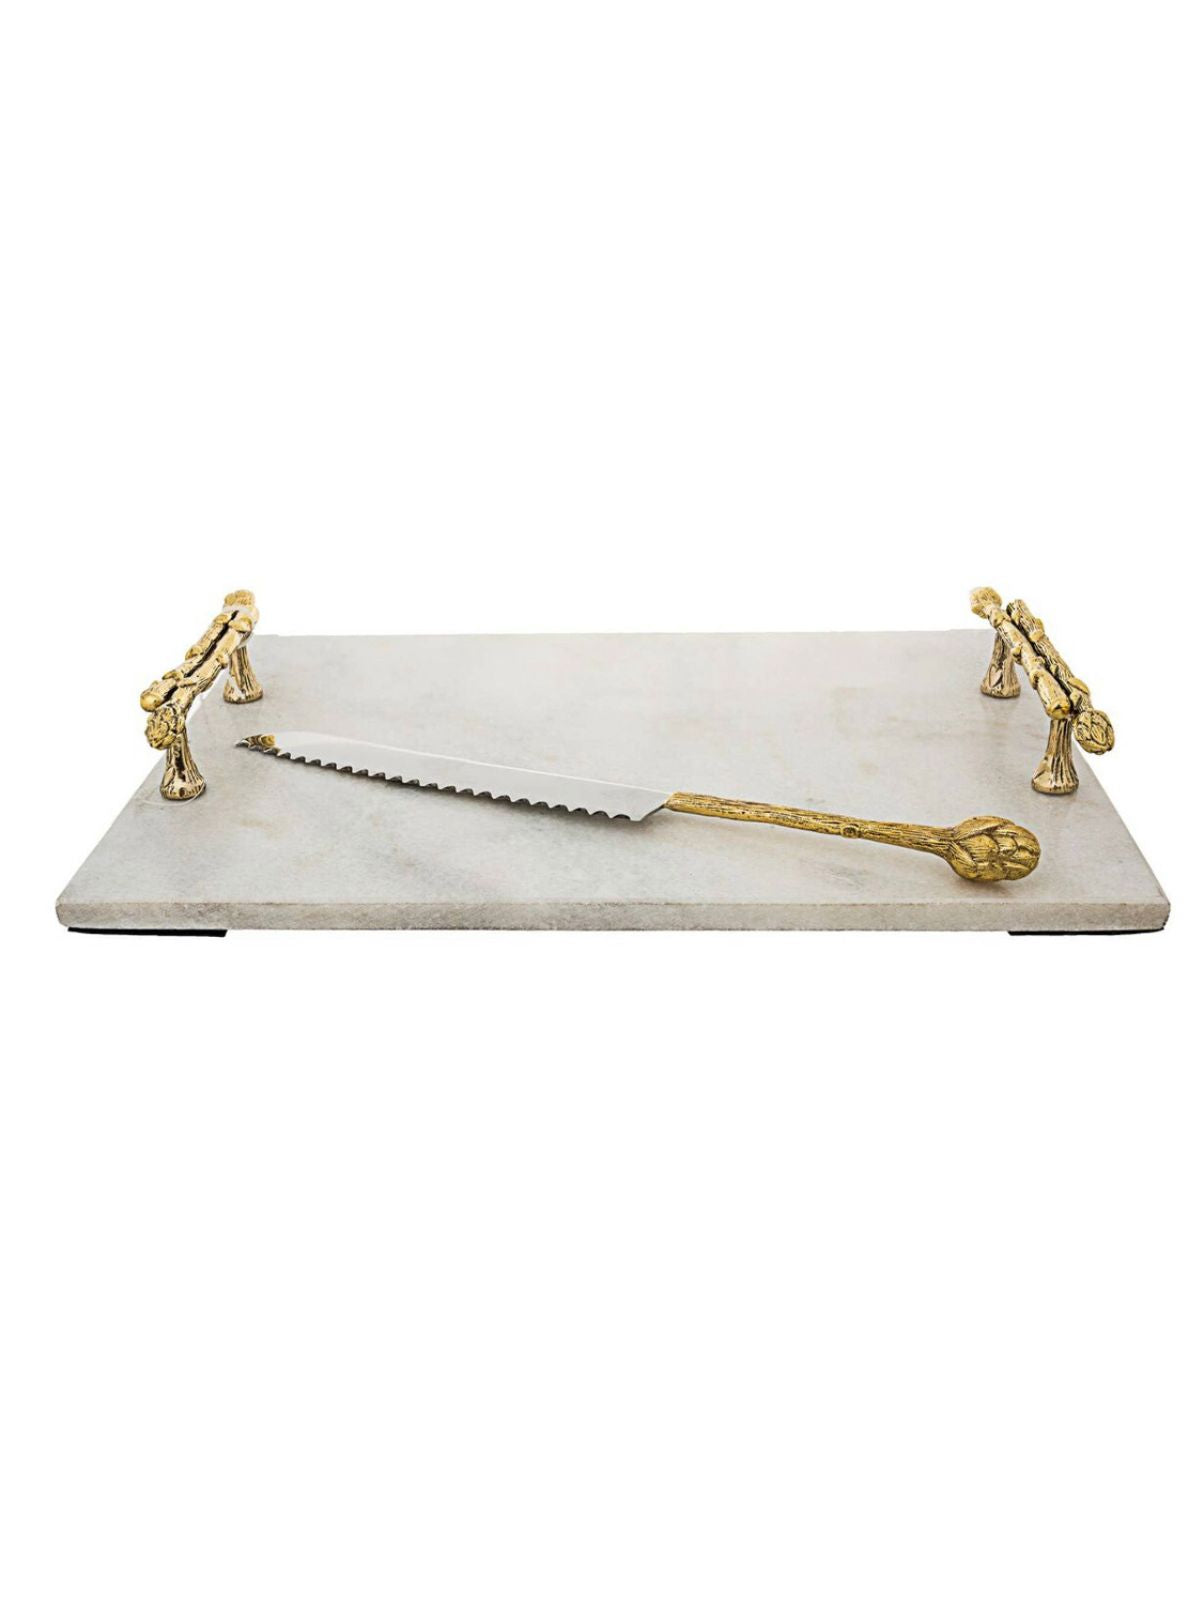 Luxurious White Marble Tray with Gold Asparagus Brass Handles and Coordinating Knife, 16L x 11W.